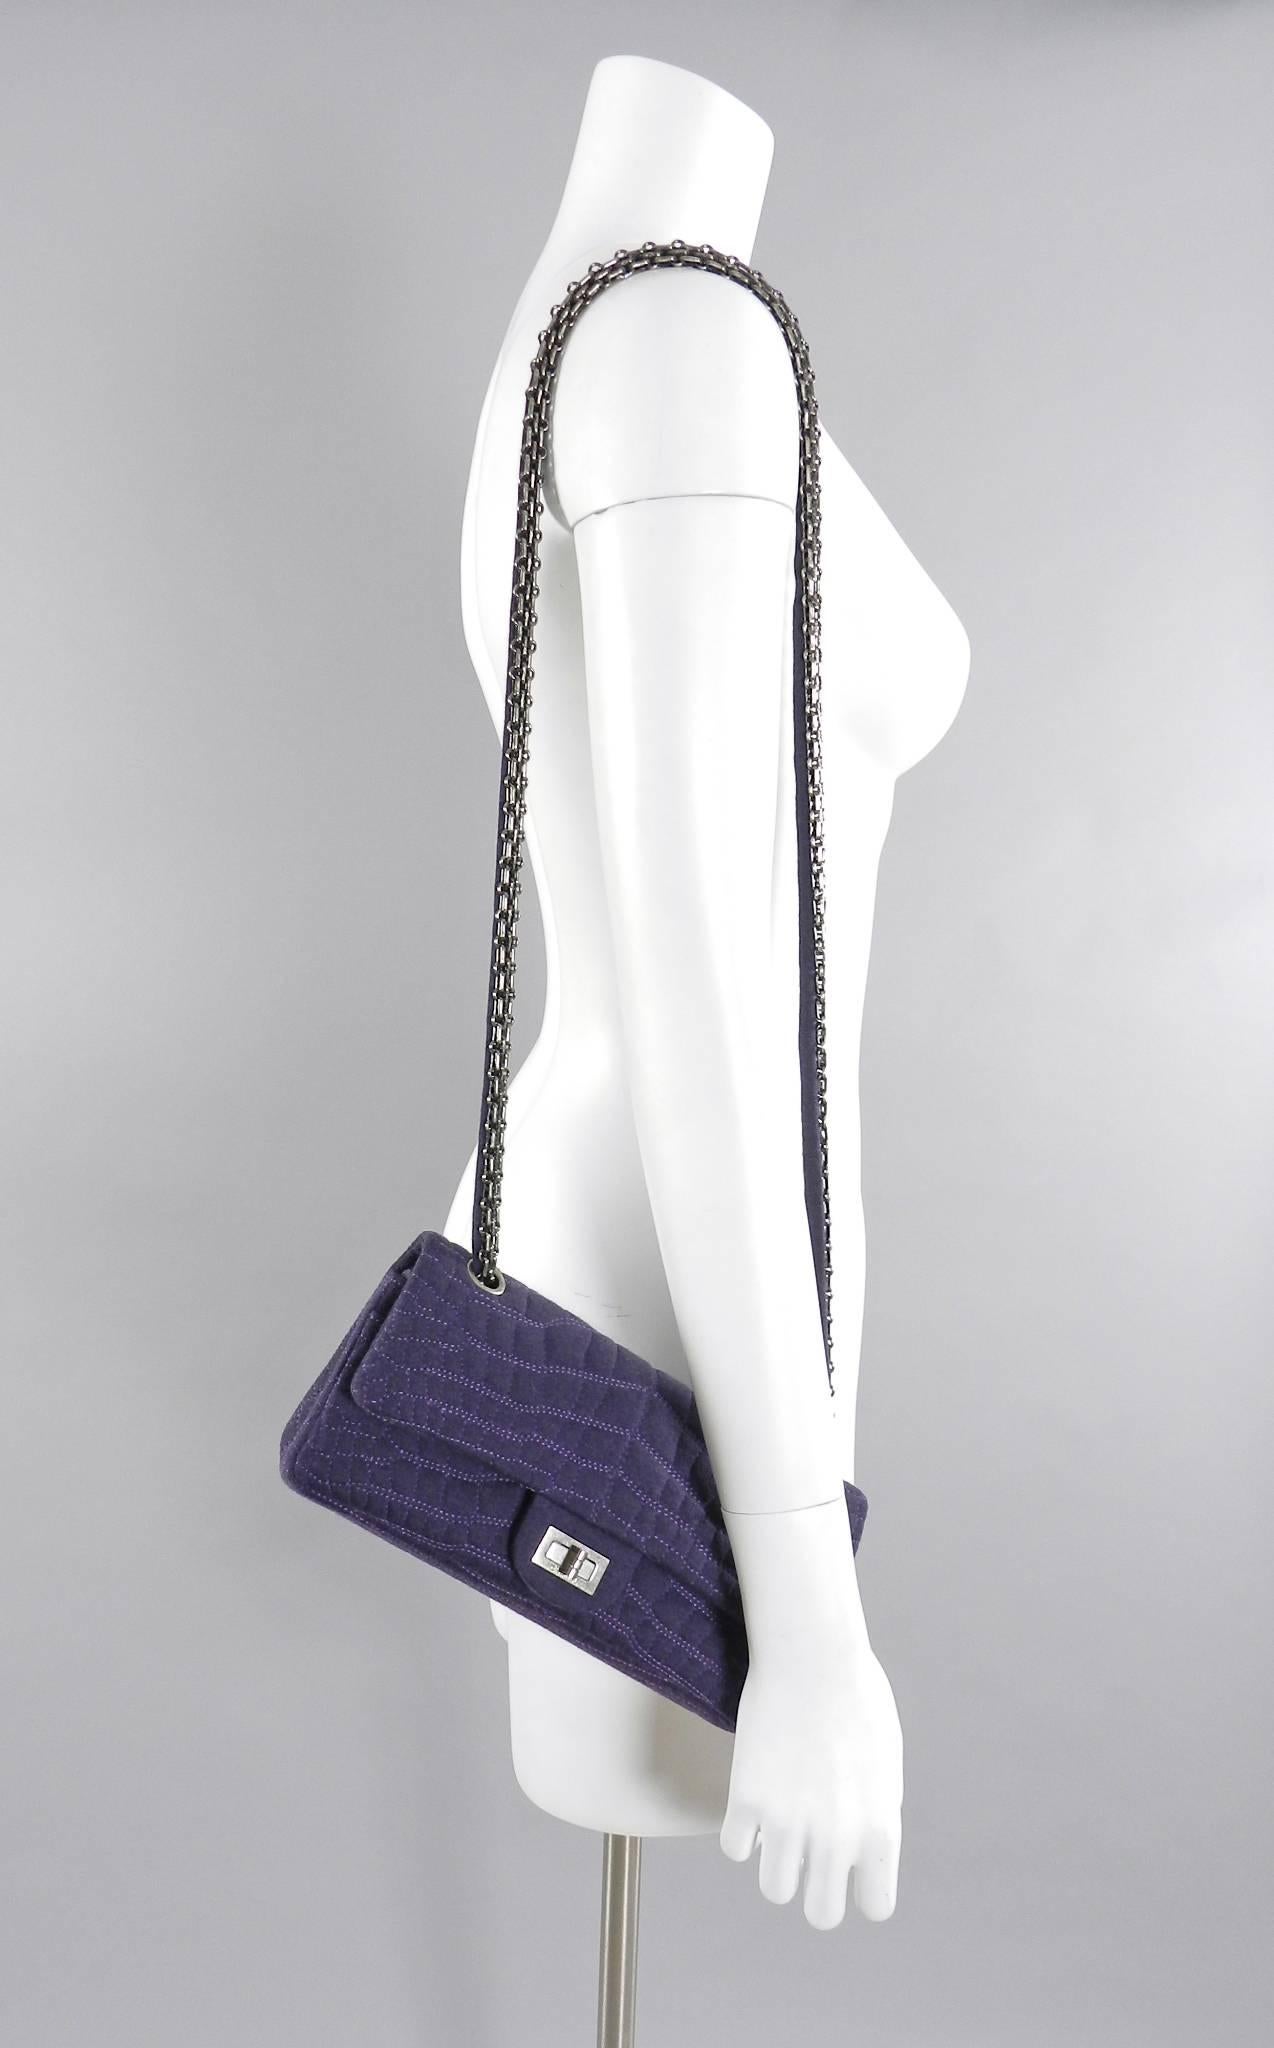 Chanel 07A Purple Knit Fabric Re-issue East West Flap Bag.  Double flap interior, gunmetal mademoiselle chain and turn clasp, quilted faux crocodile texture.  Measures 10 x 4.75 x 2.25